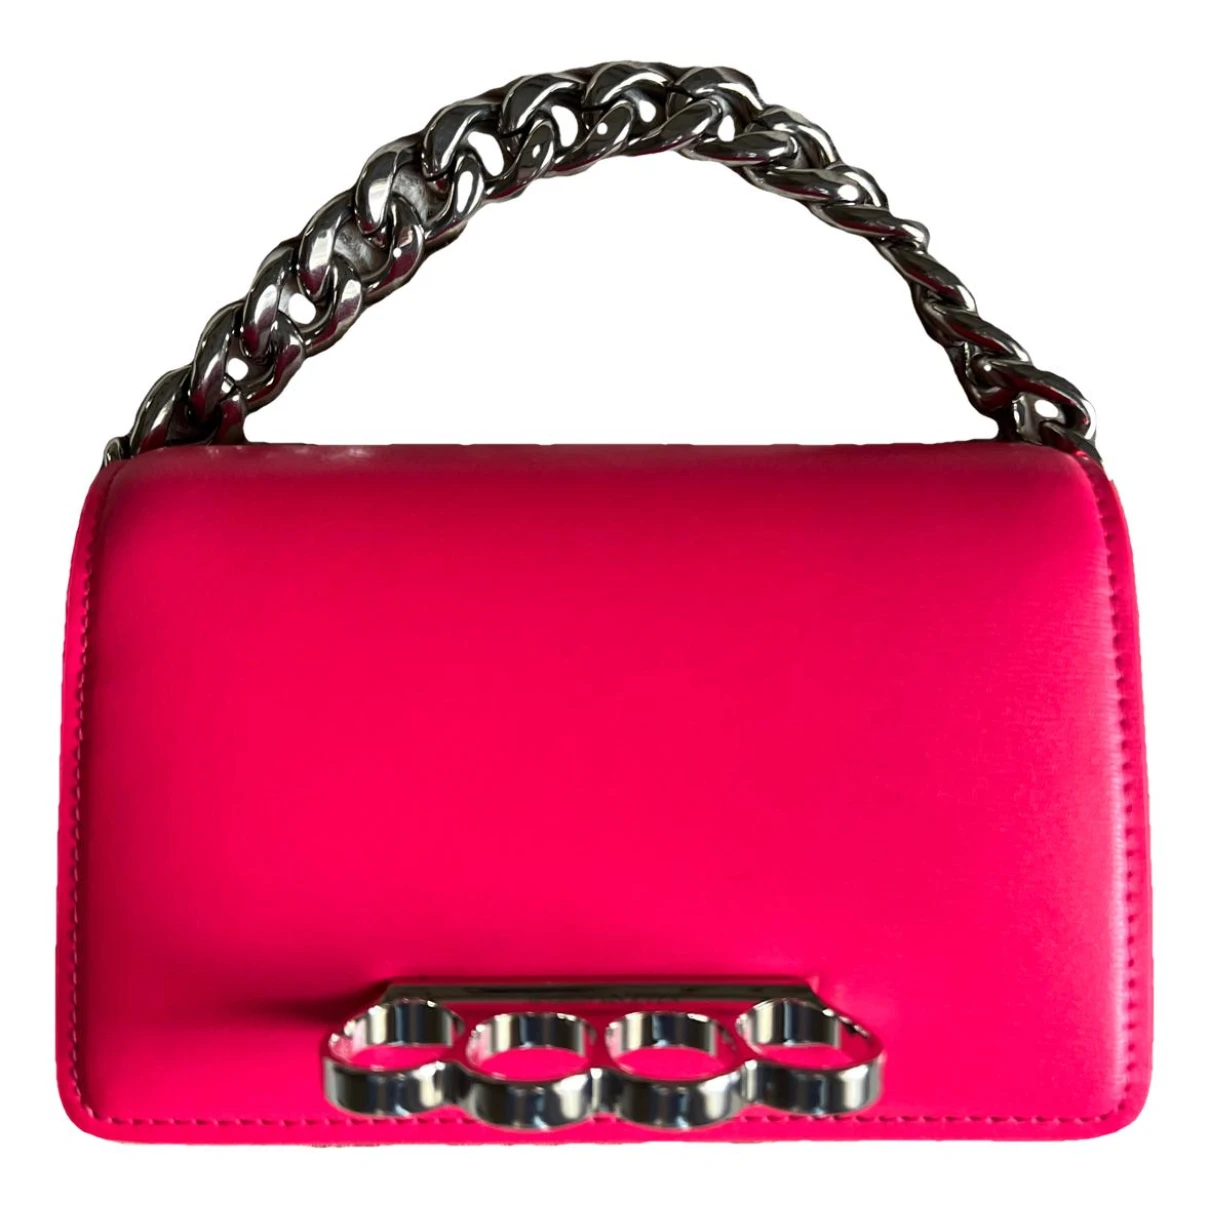 Pre-owned Alexander Mcqueen Leather Clutch Bag In Pink